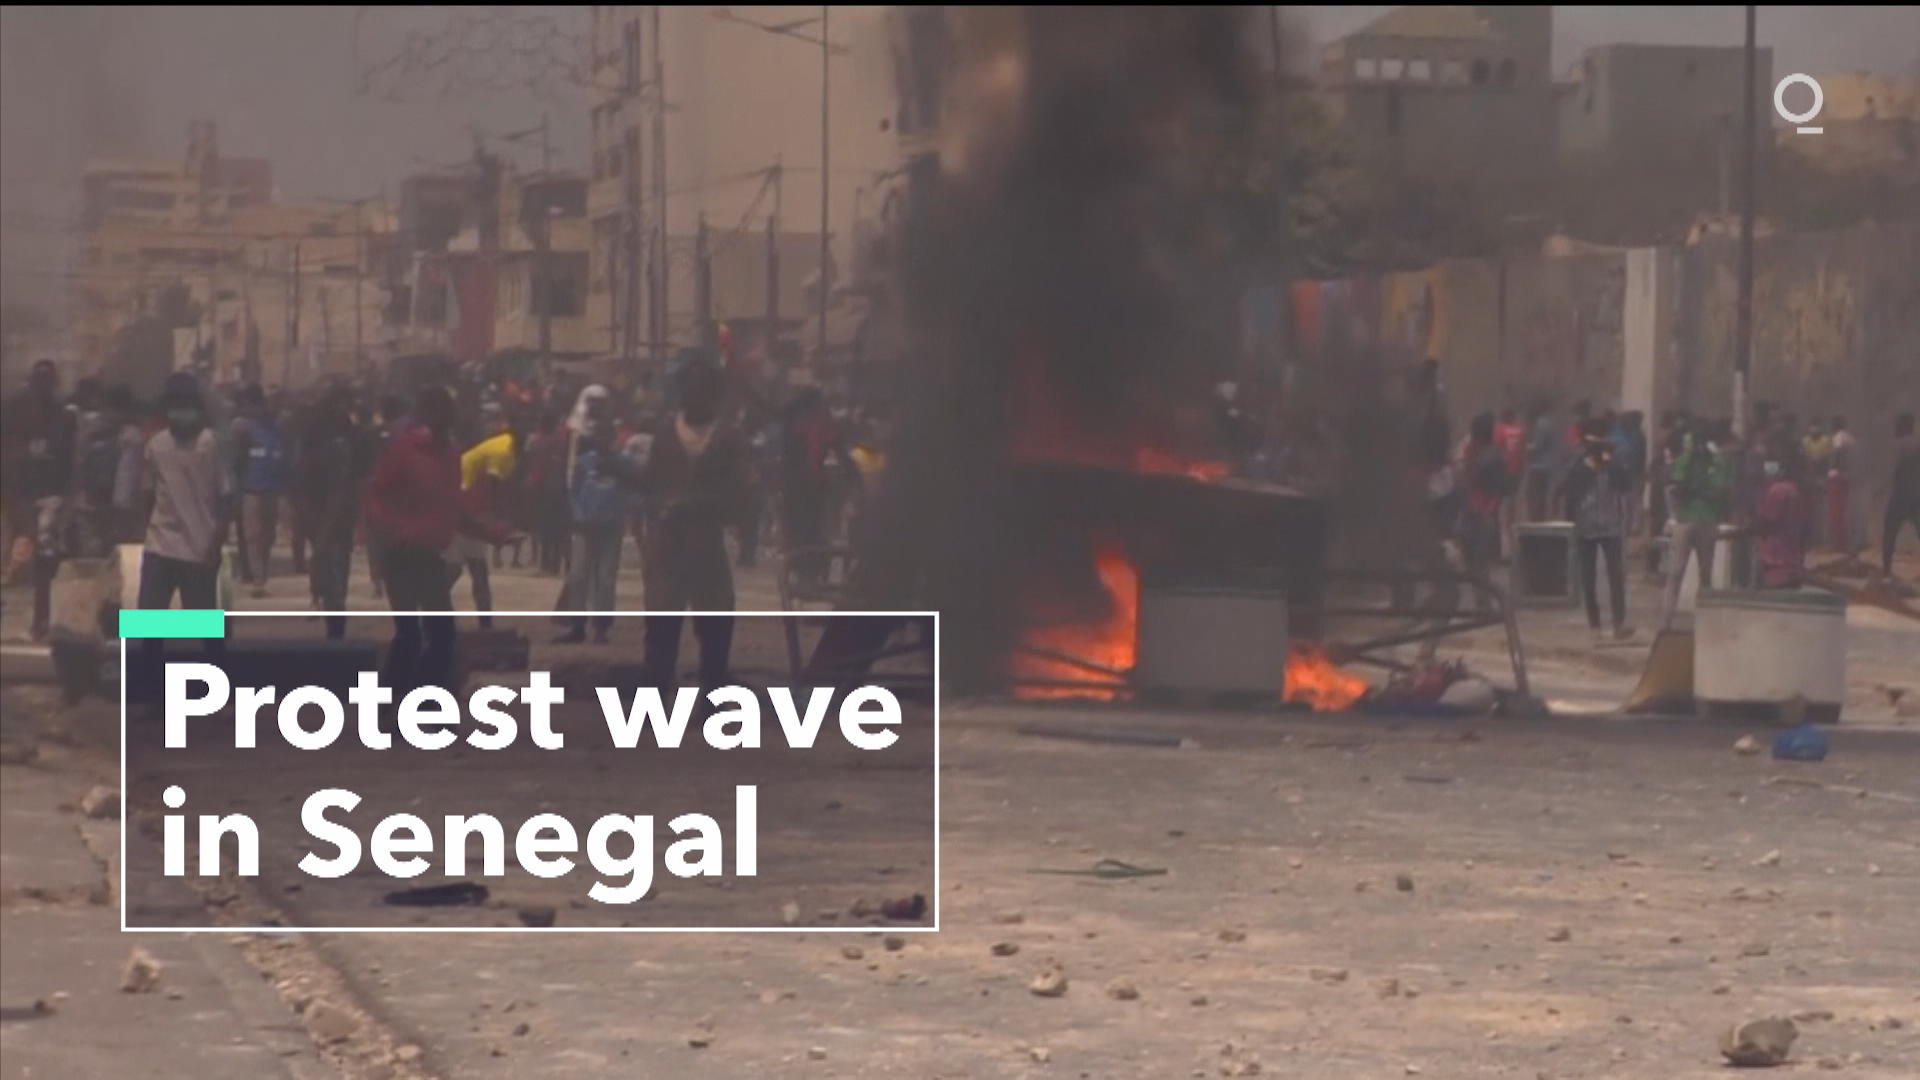 Senegal, one of Africa's bastions of stability, faces its gravest threat of  unrest in decades